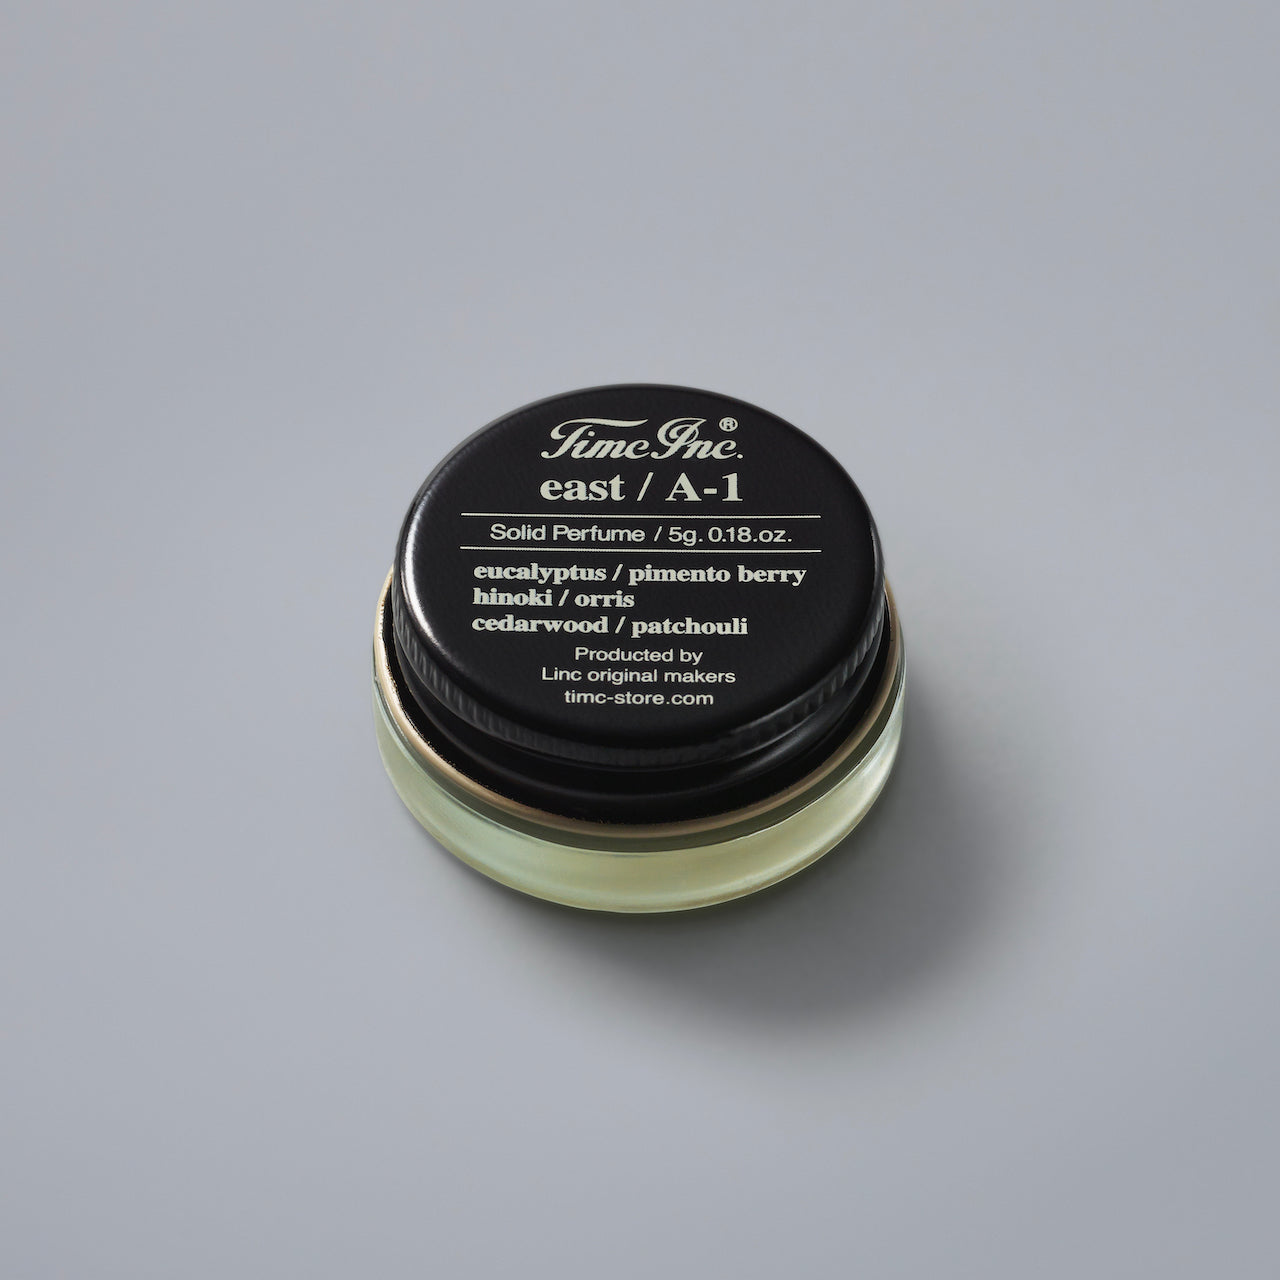 Timc Inc Solid Perfume east A-1 - その他